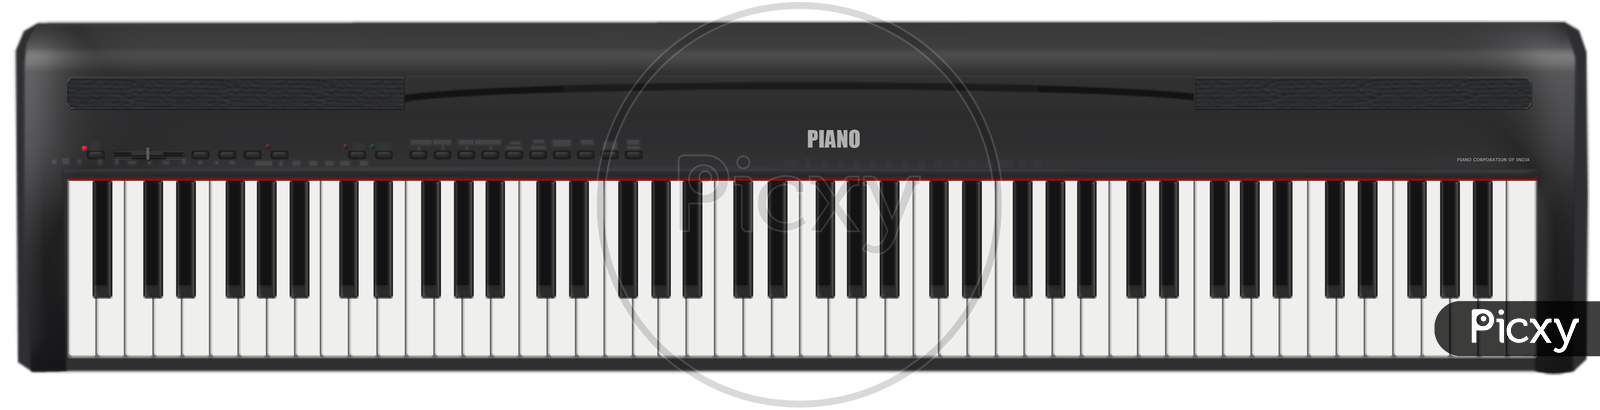 Electronic Piano 3D illustration